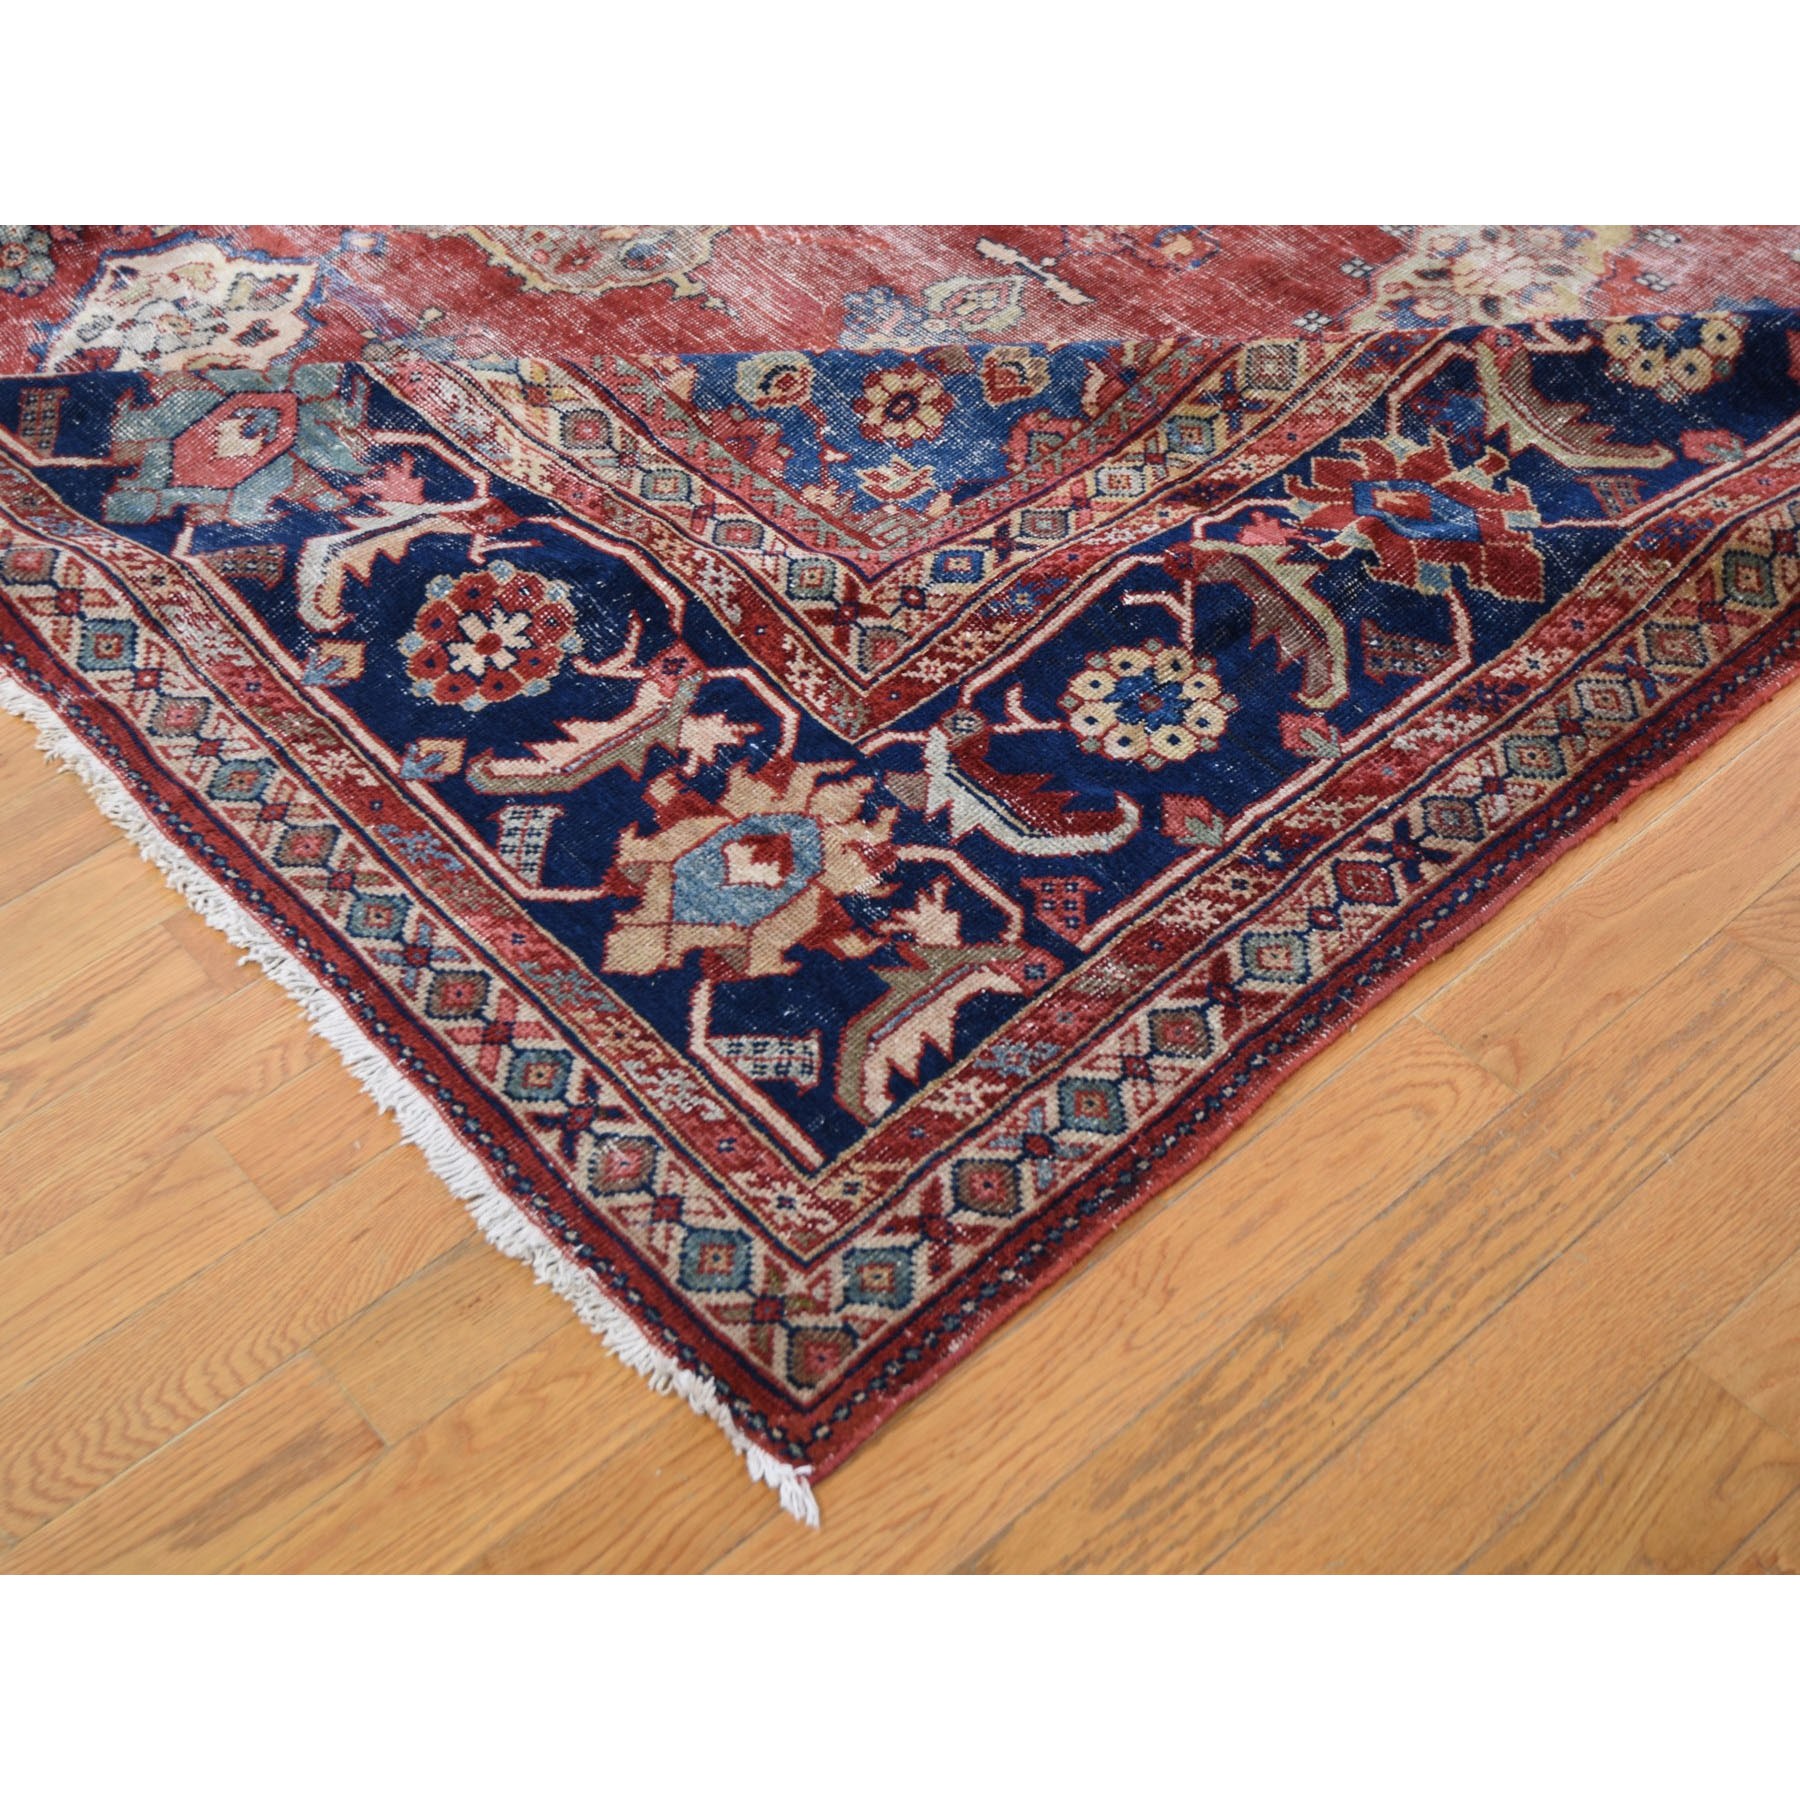 10-3 x13-9  Red Antique and Worn Persian Mahal Hand Knotted Oriental Rug 